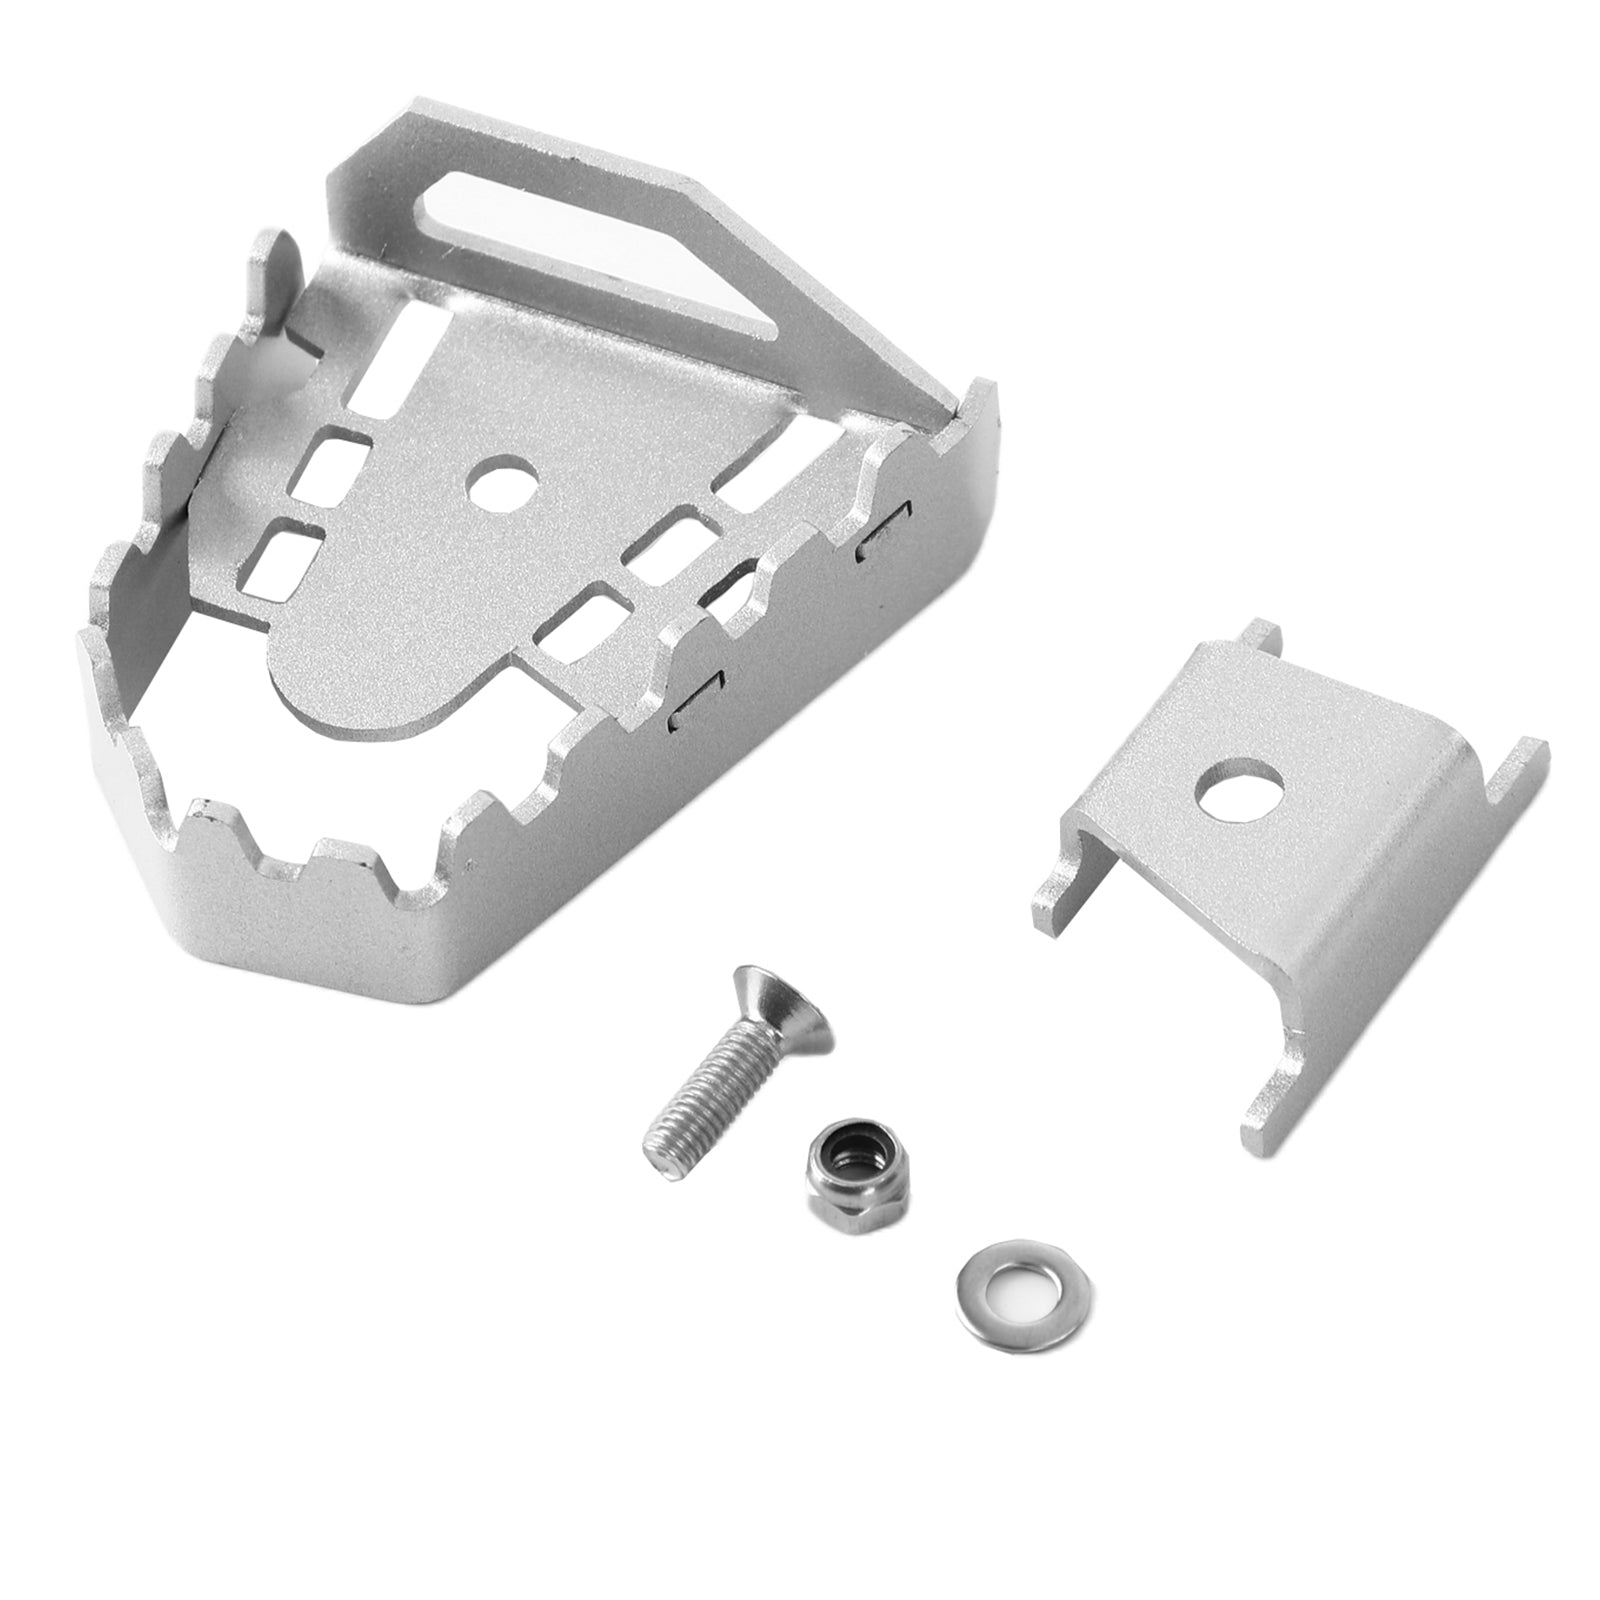 Aluminium Brake Pedal Extension Peg Enlarger For F850Gs F750Gs 08-16 09 Silver Generic